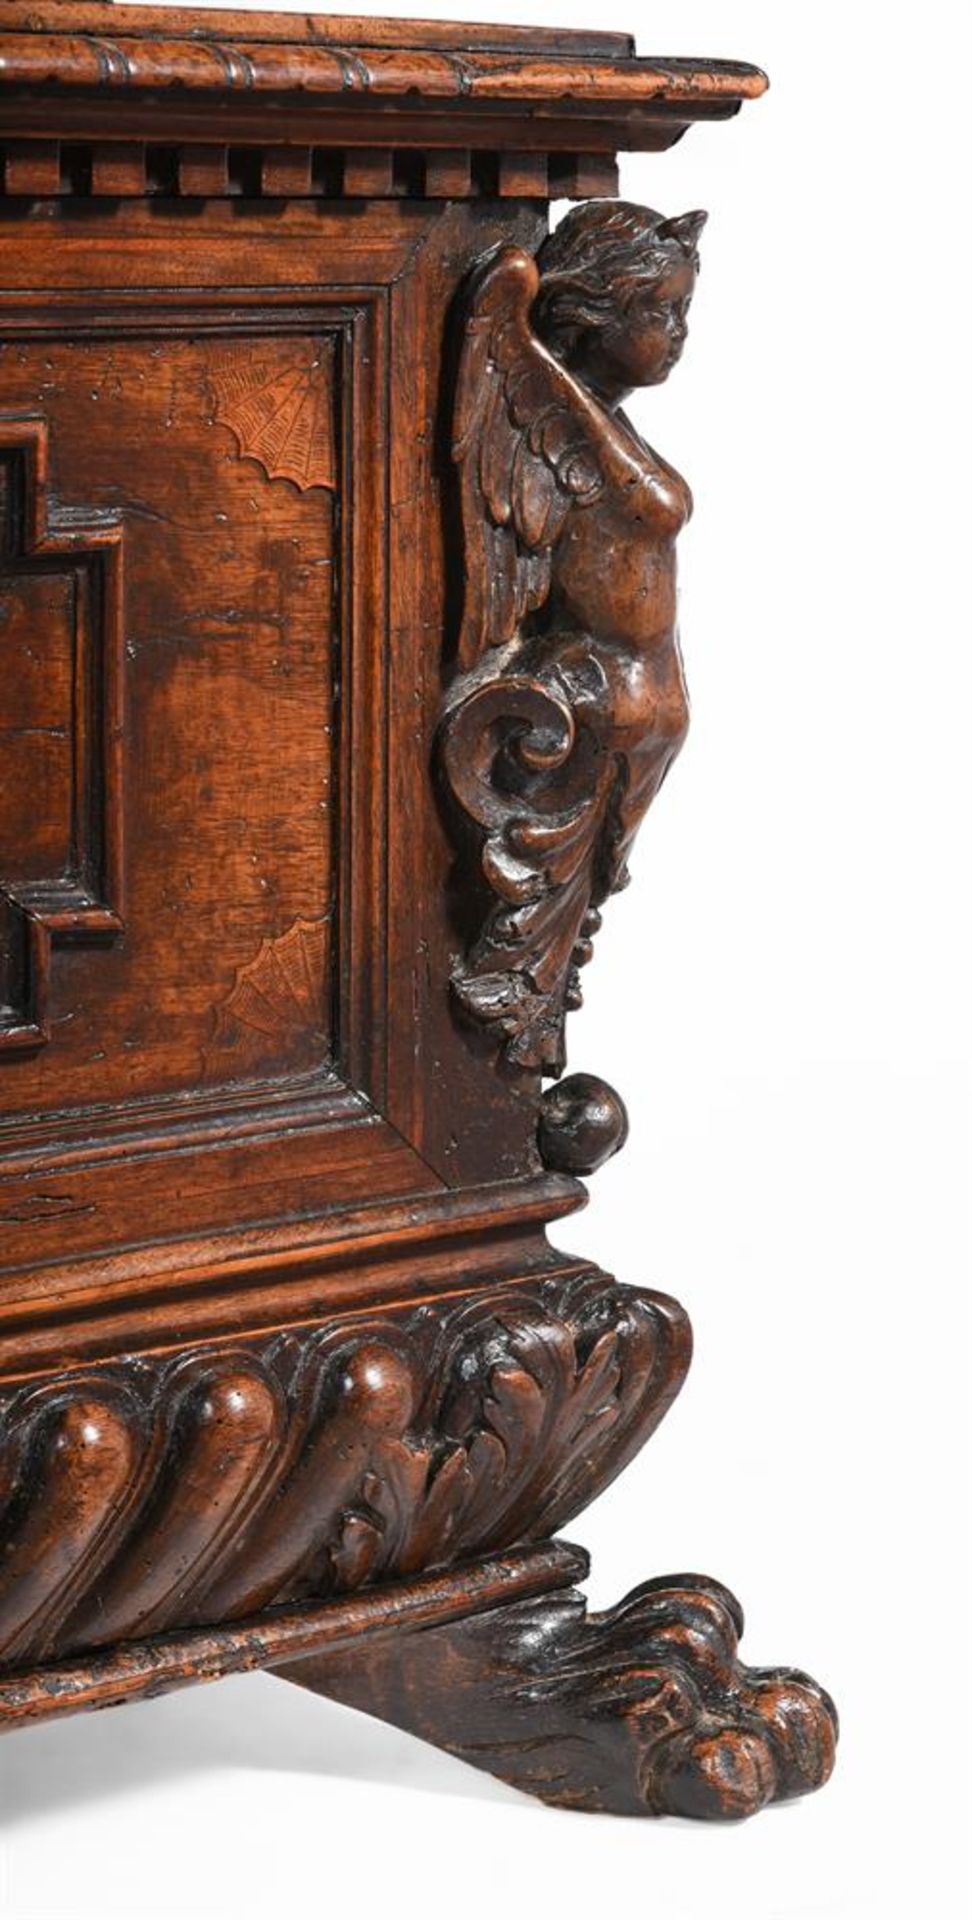 AN ITALIAN CARVED WALNUT AND INLAID CASSONE, EARLY 17TH CENTURY AND LATER ELEMENTS - Image 5 of 8